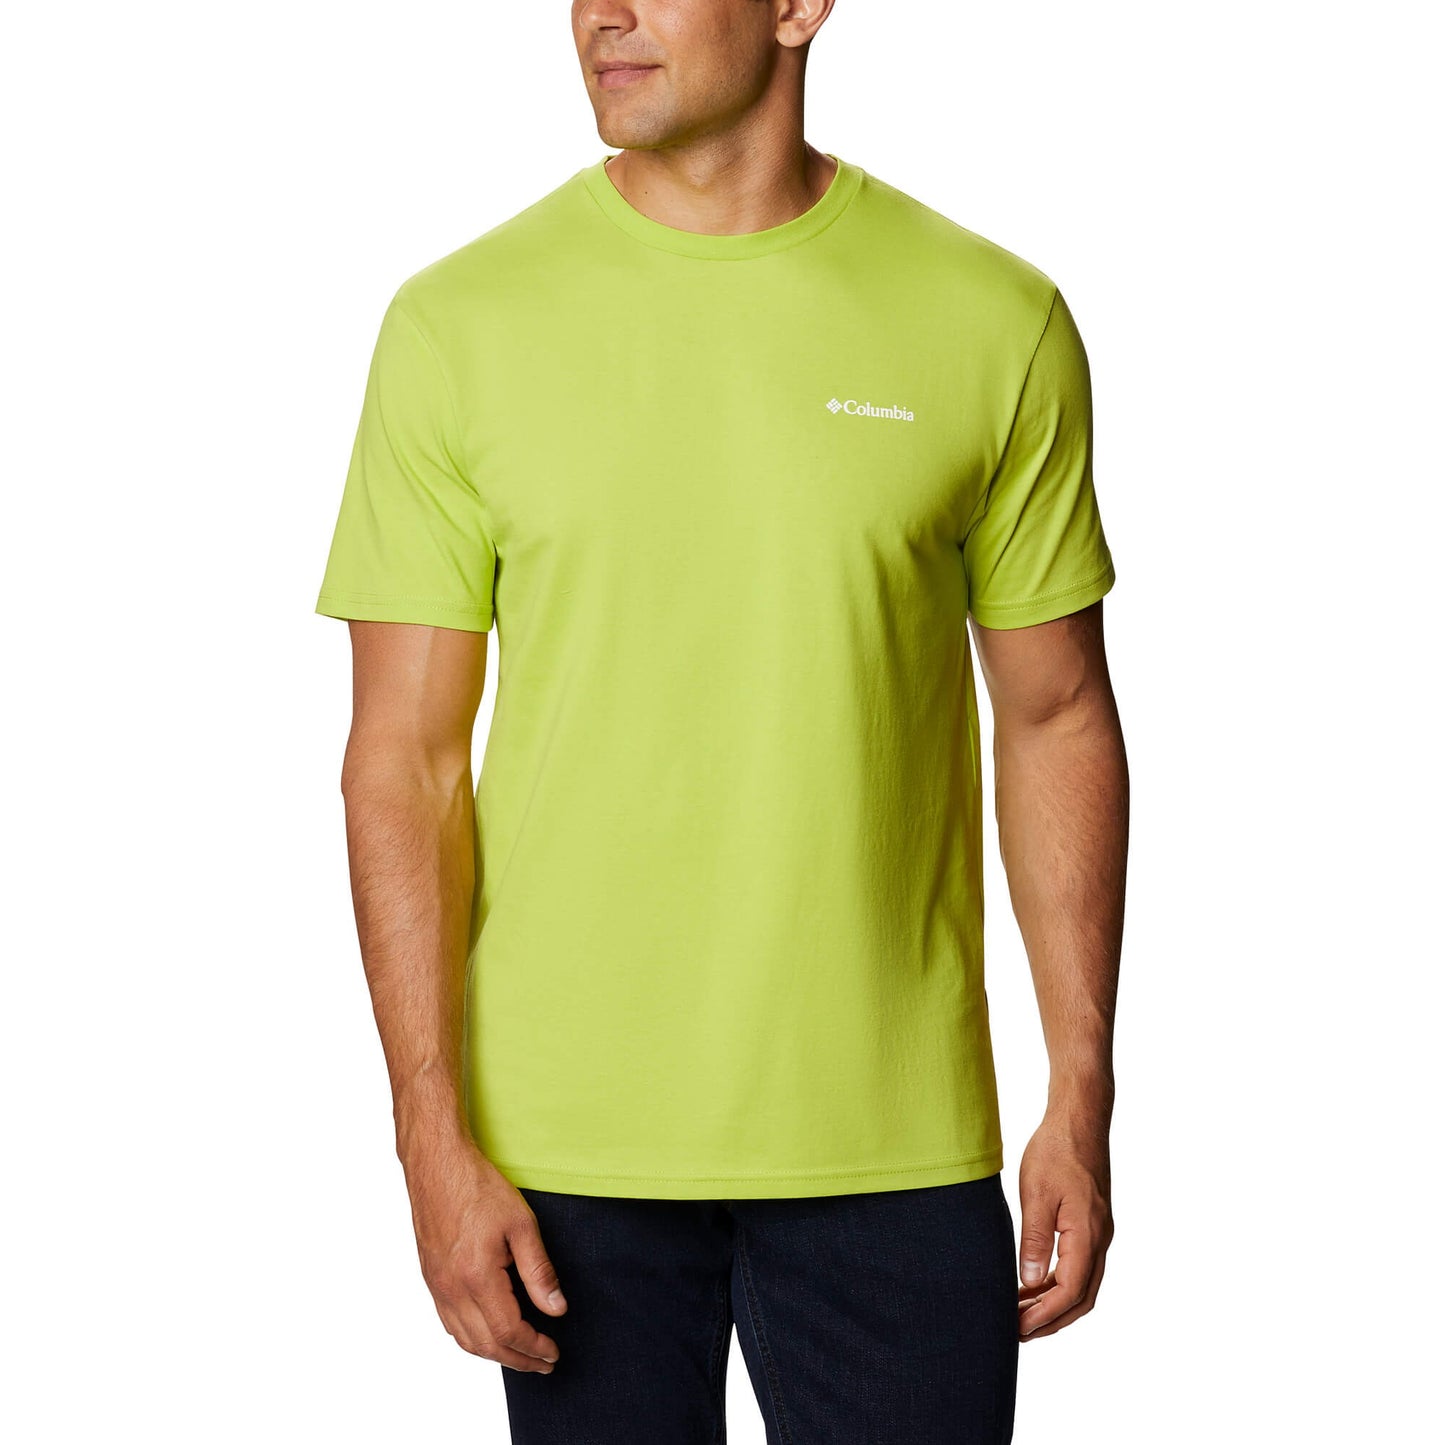 Columbia North Cascades Short Sleeve Bright Chartreuse